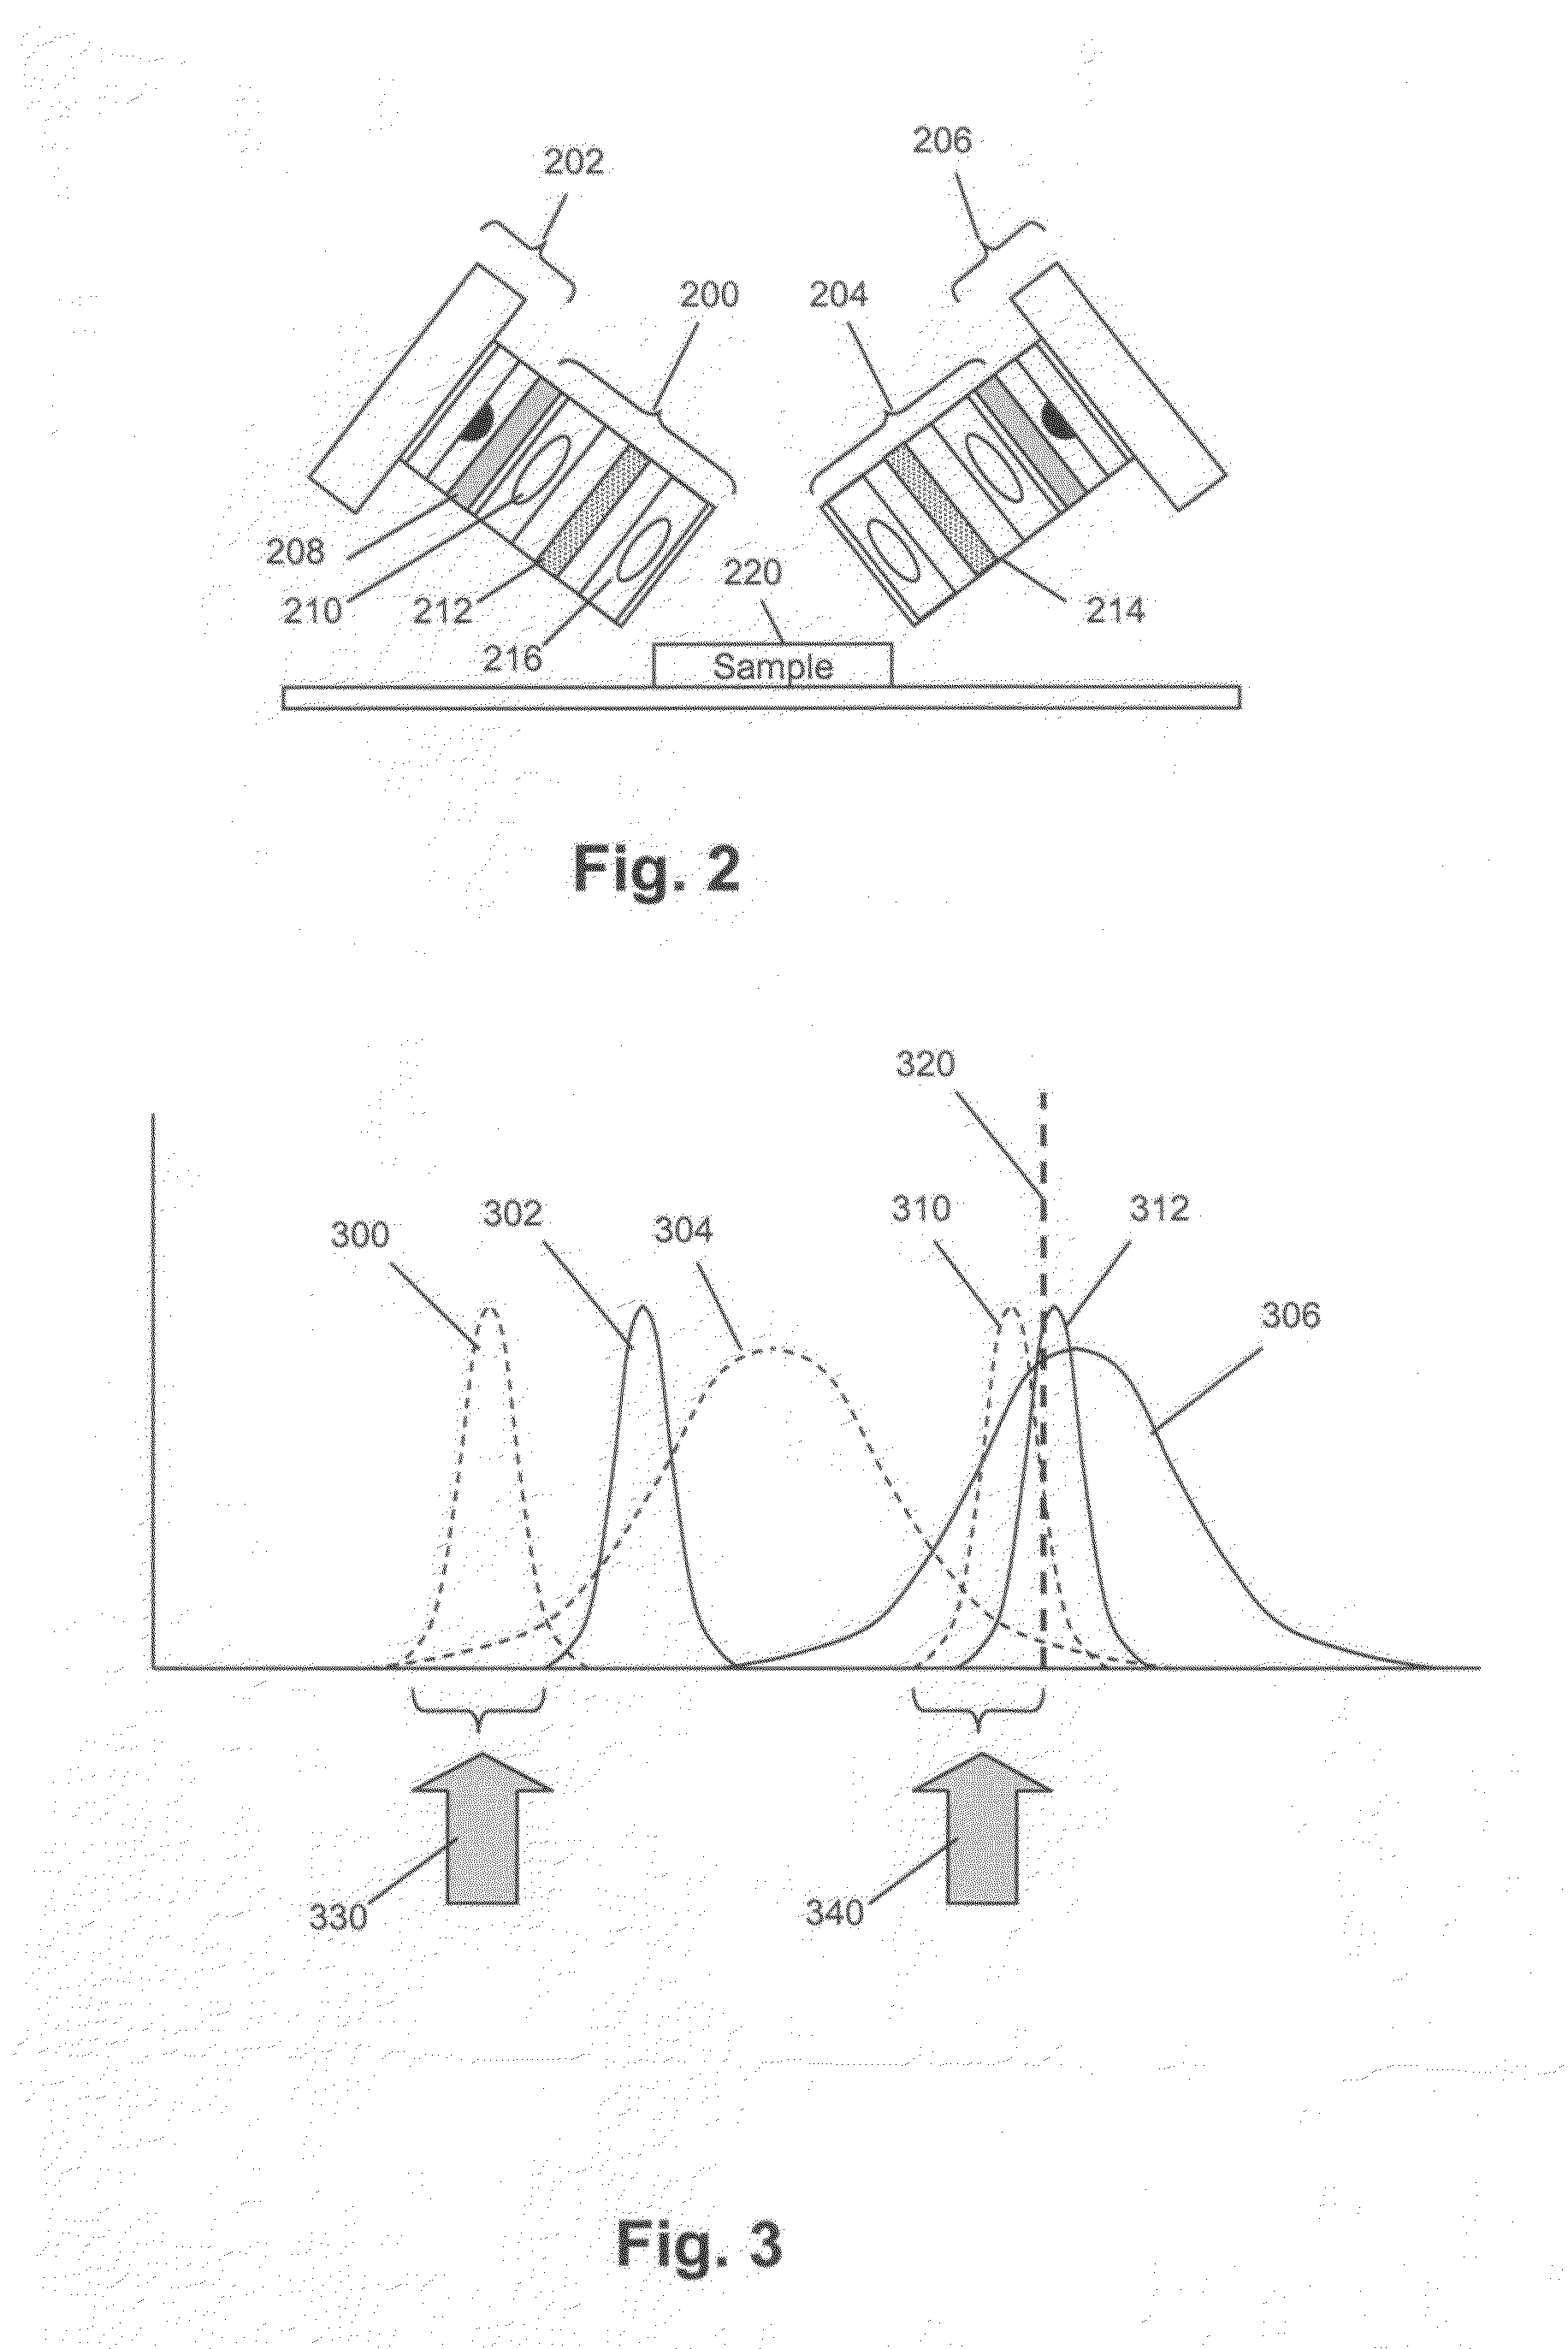 Method, system, and compositions for cell counting and analysis